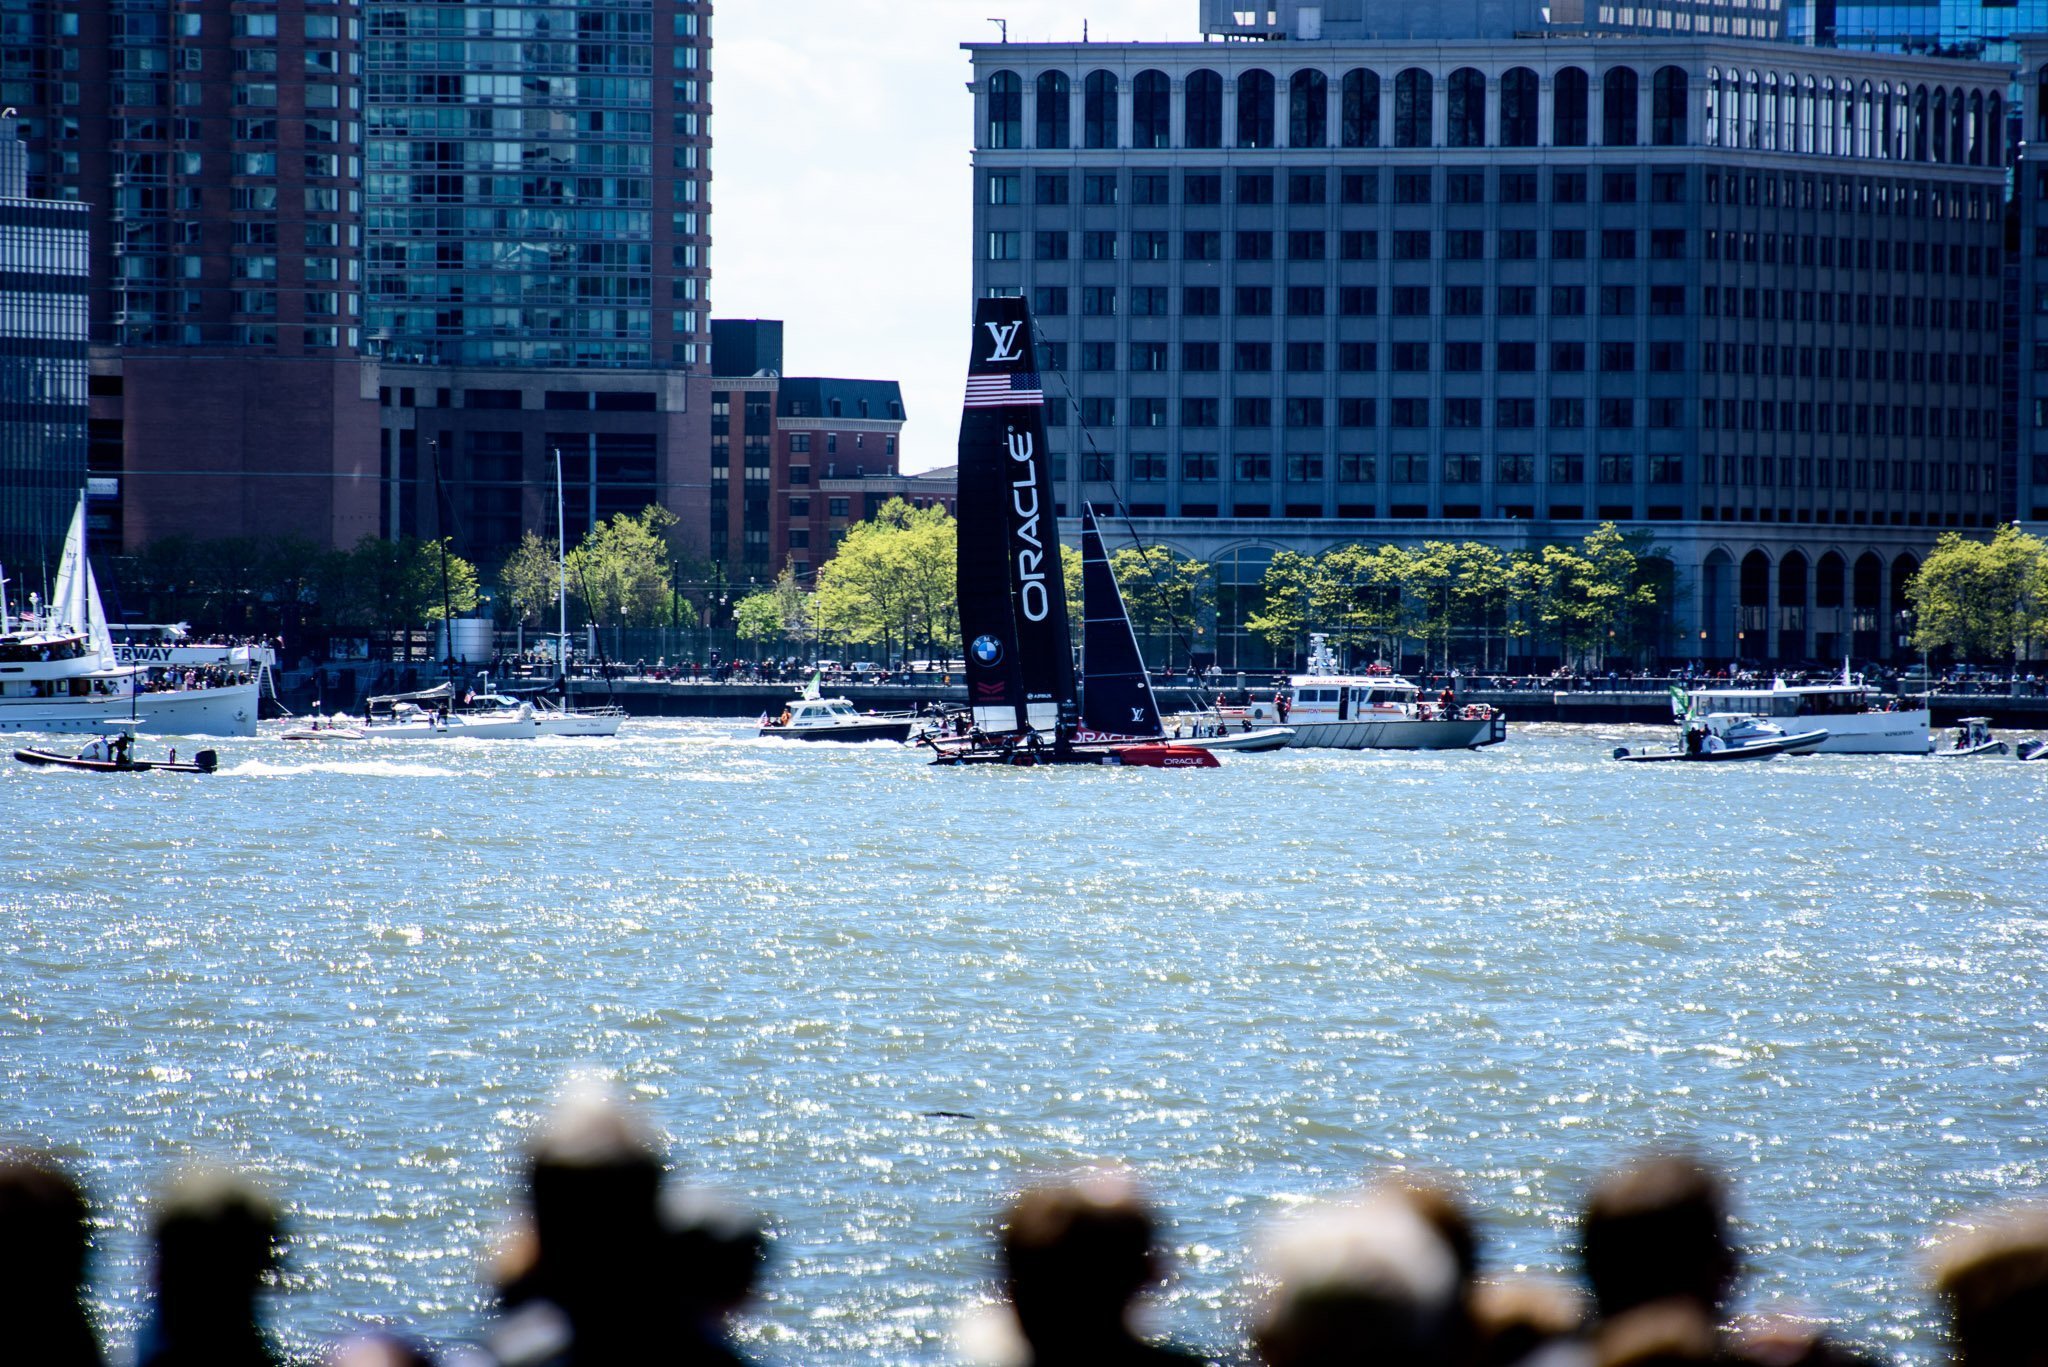 Land Rover America's Cup